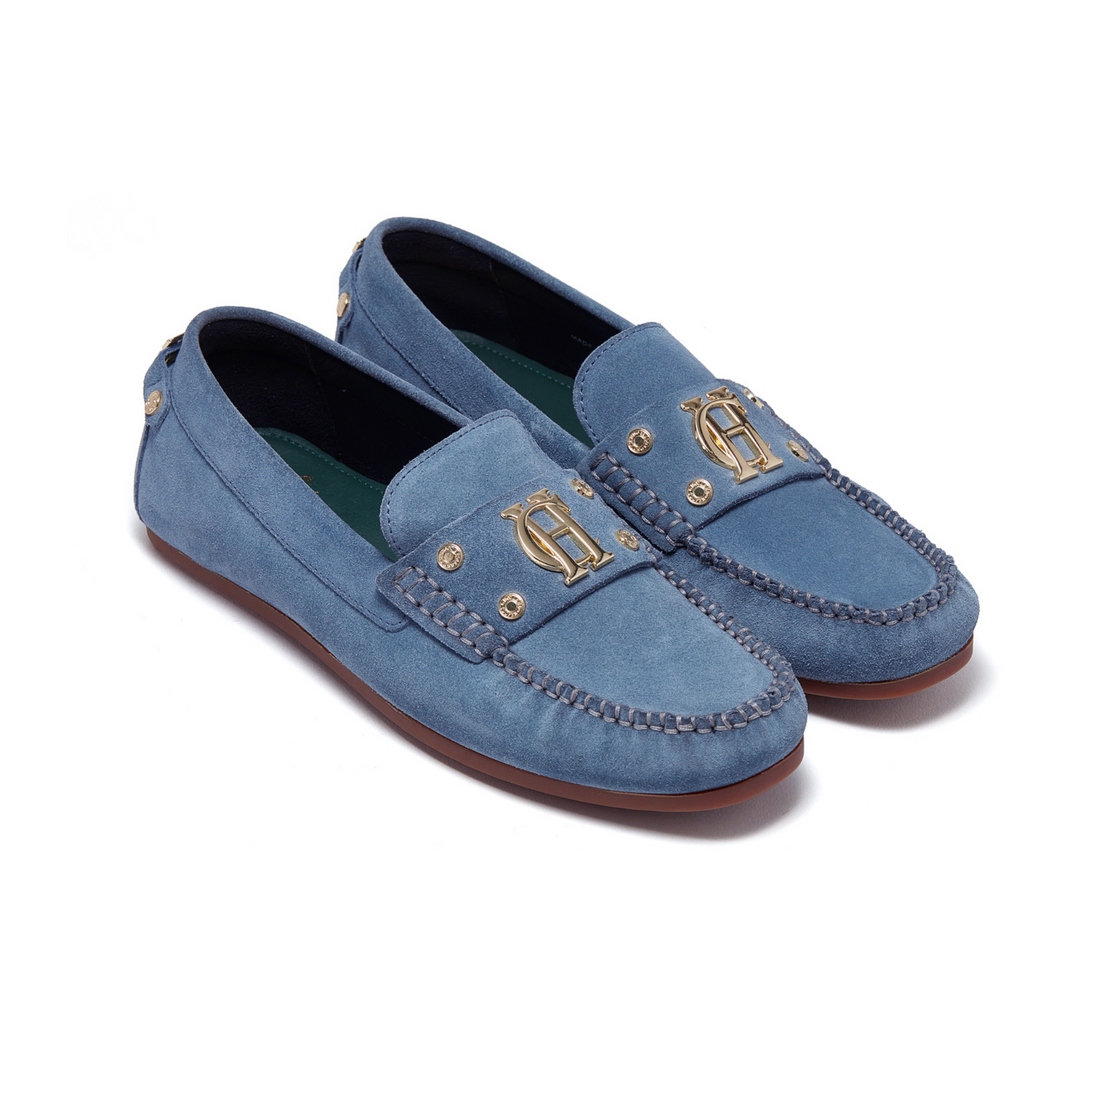 The Driving Loafer Soft Blue Suede